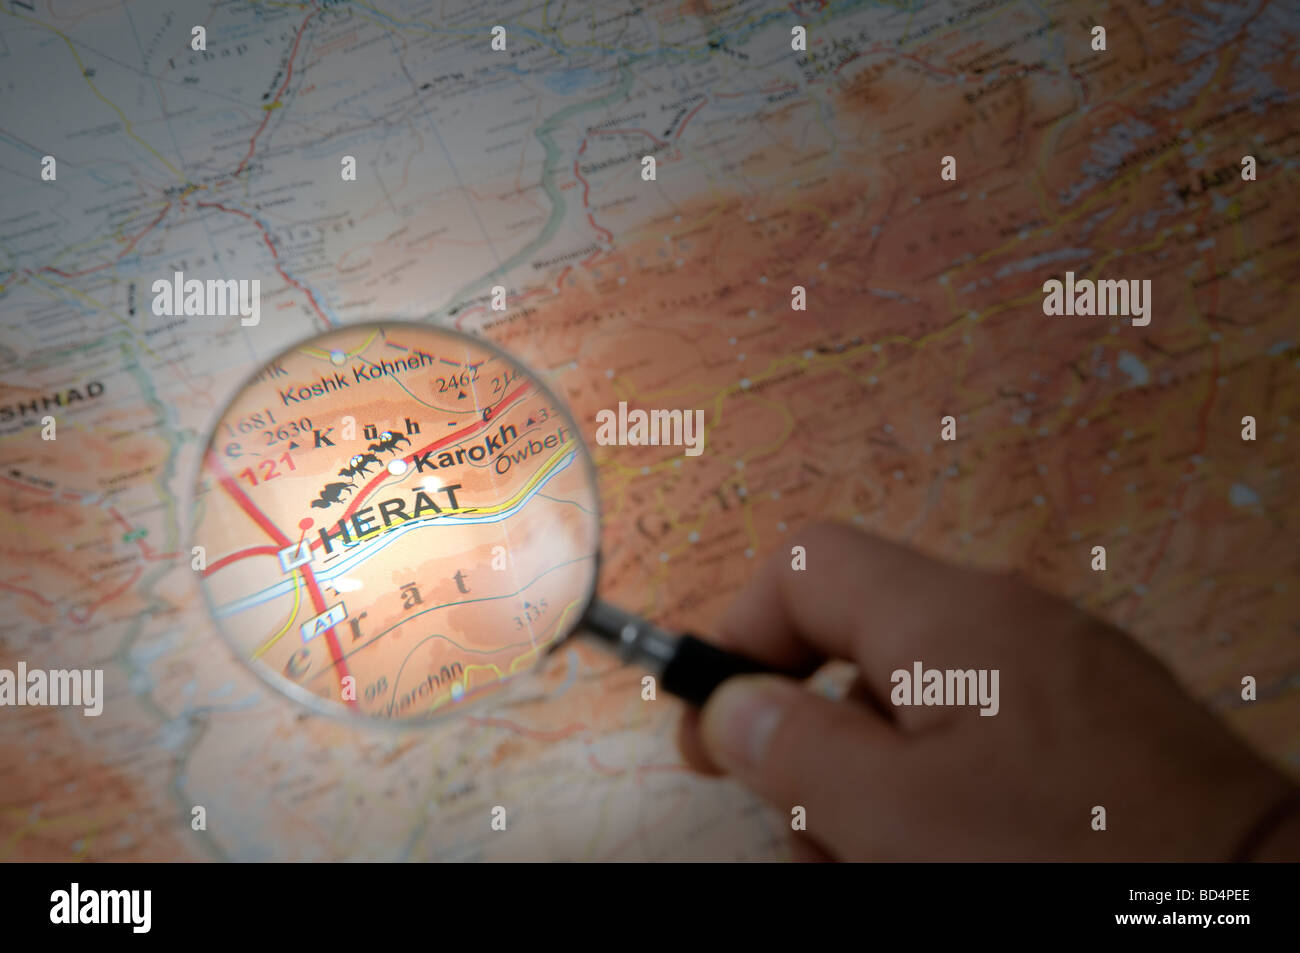 indicate with a finger the city of Herat on a map Stock Photo